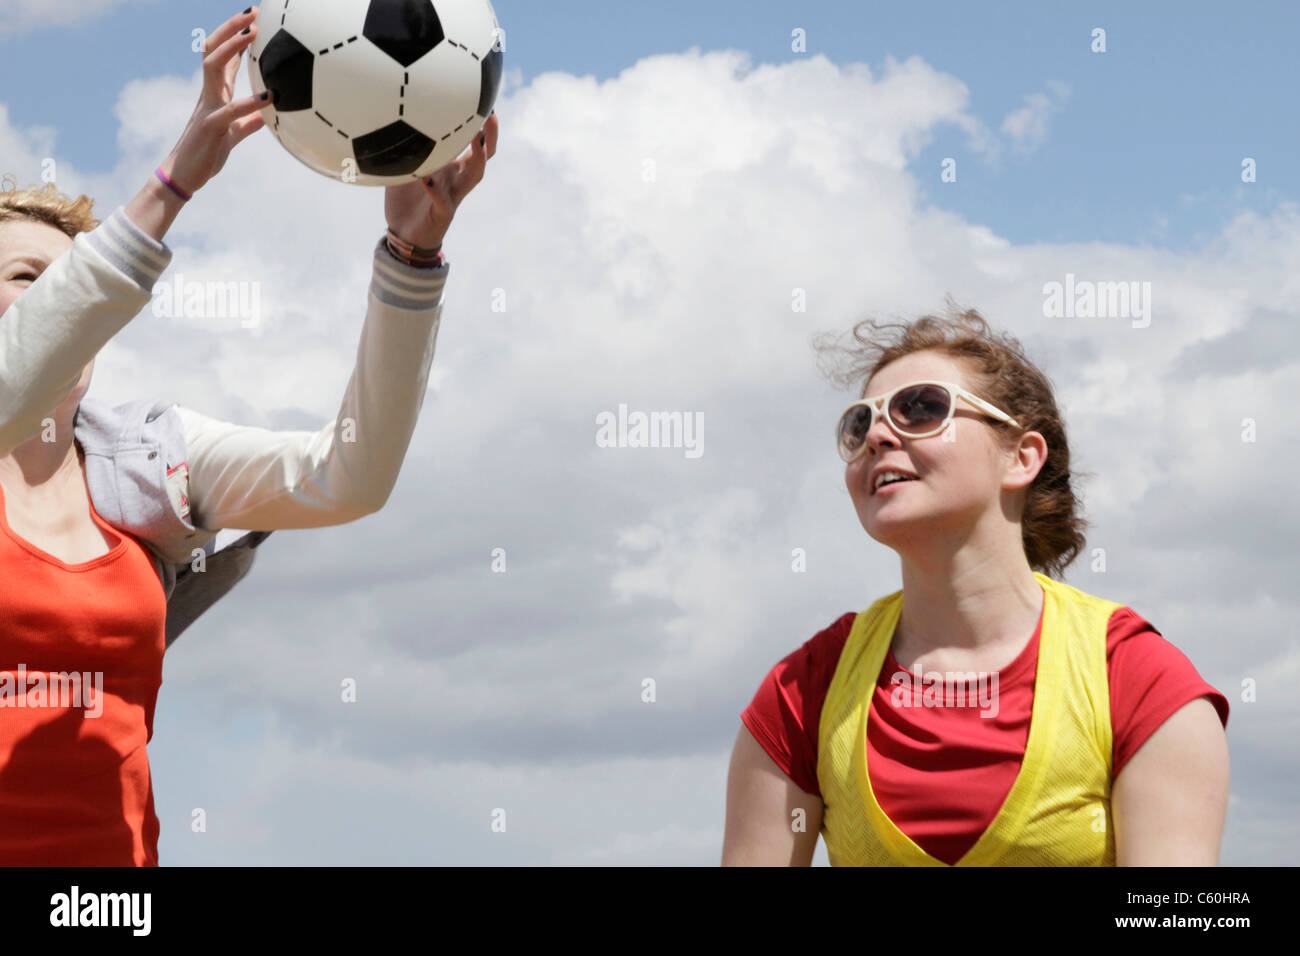 Girls playing soccer together Stock Photo